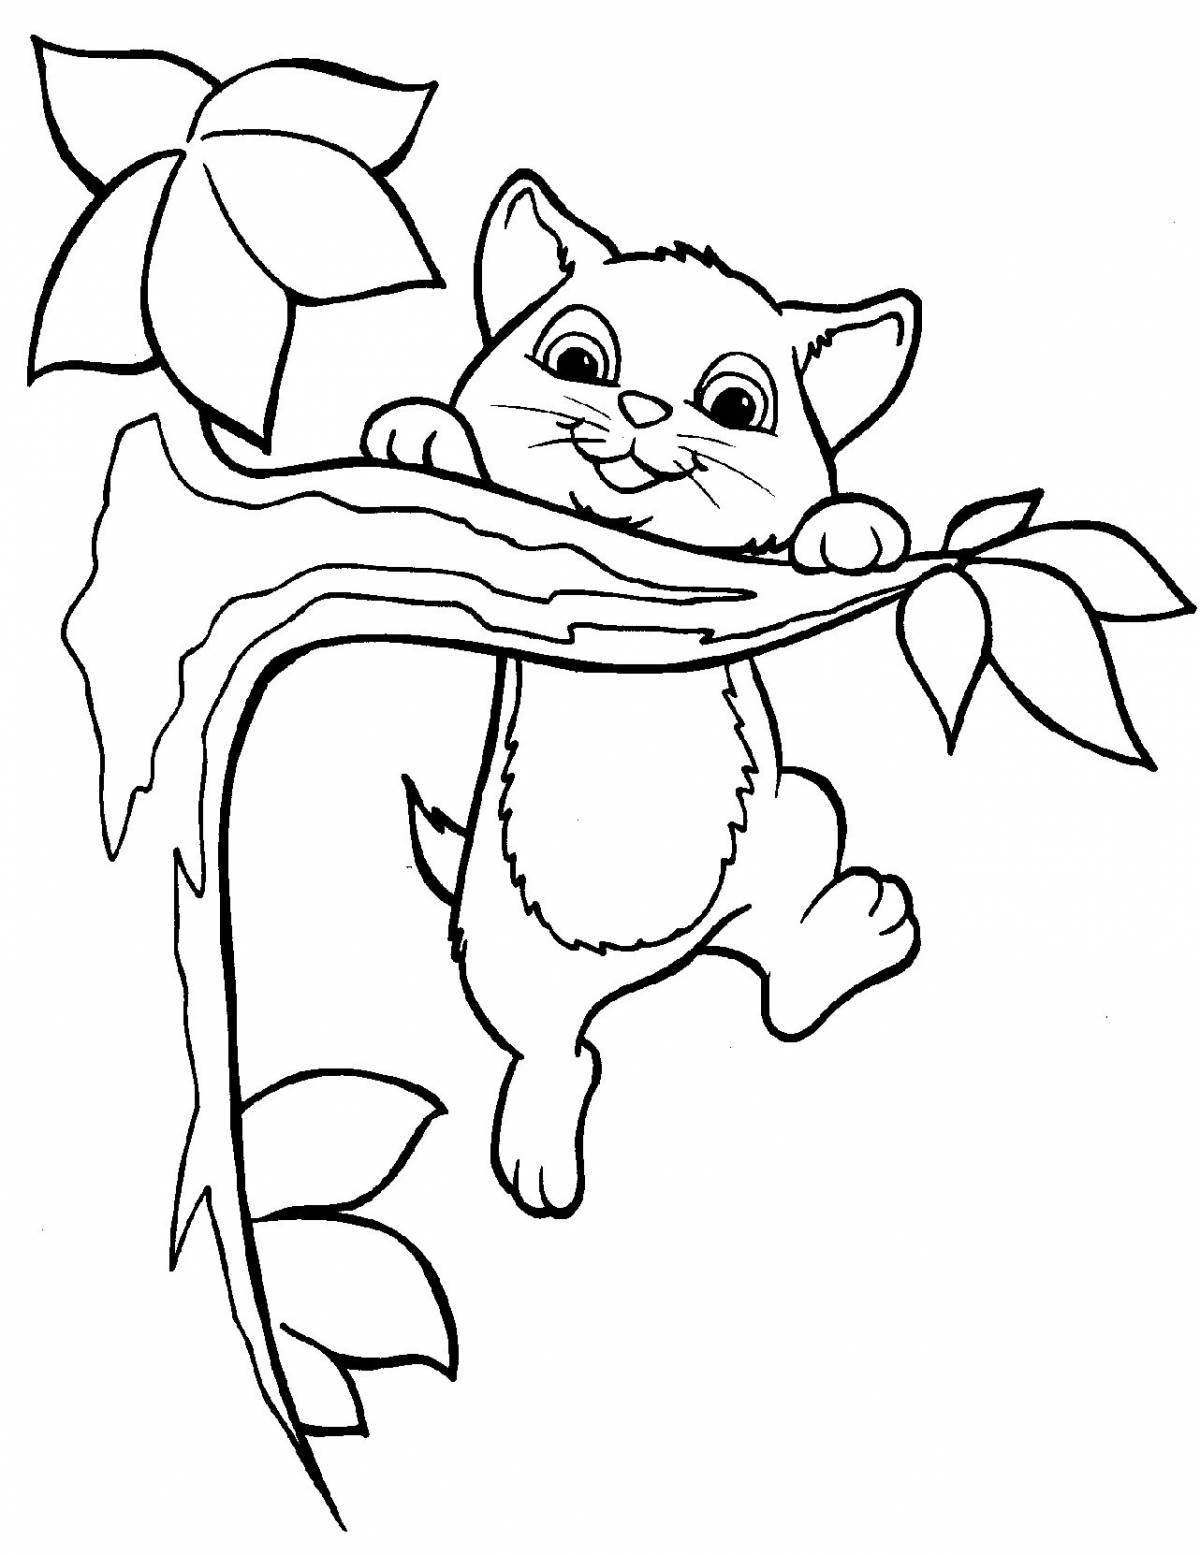 Majestic cat coloring pages for boys